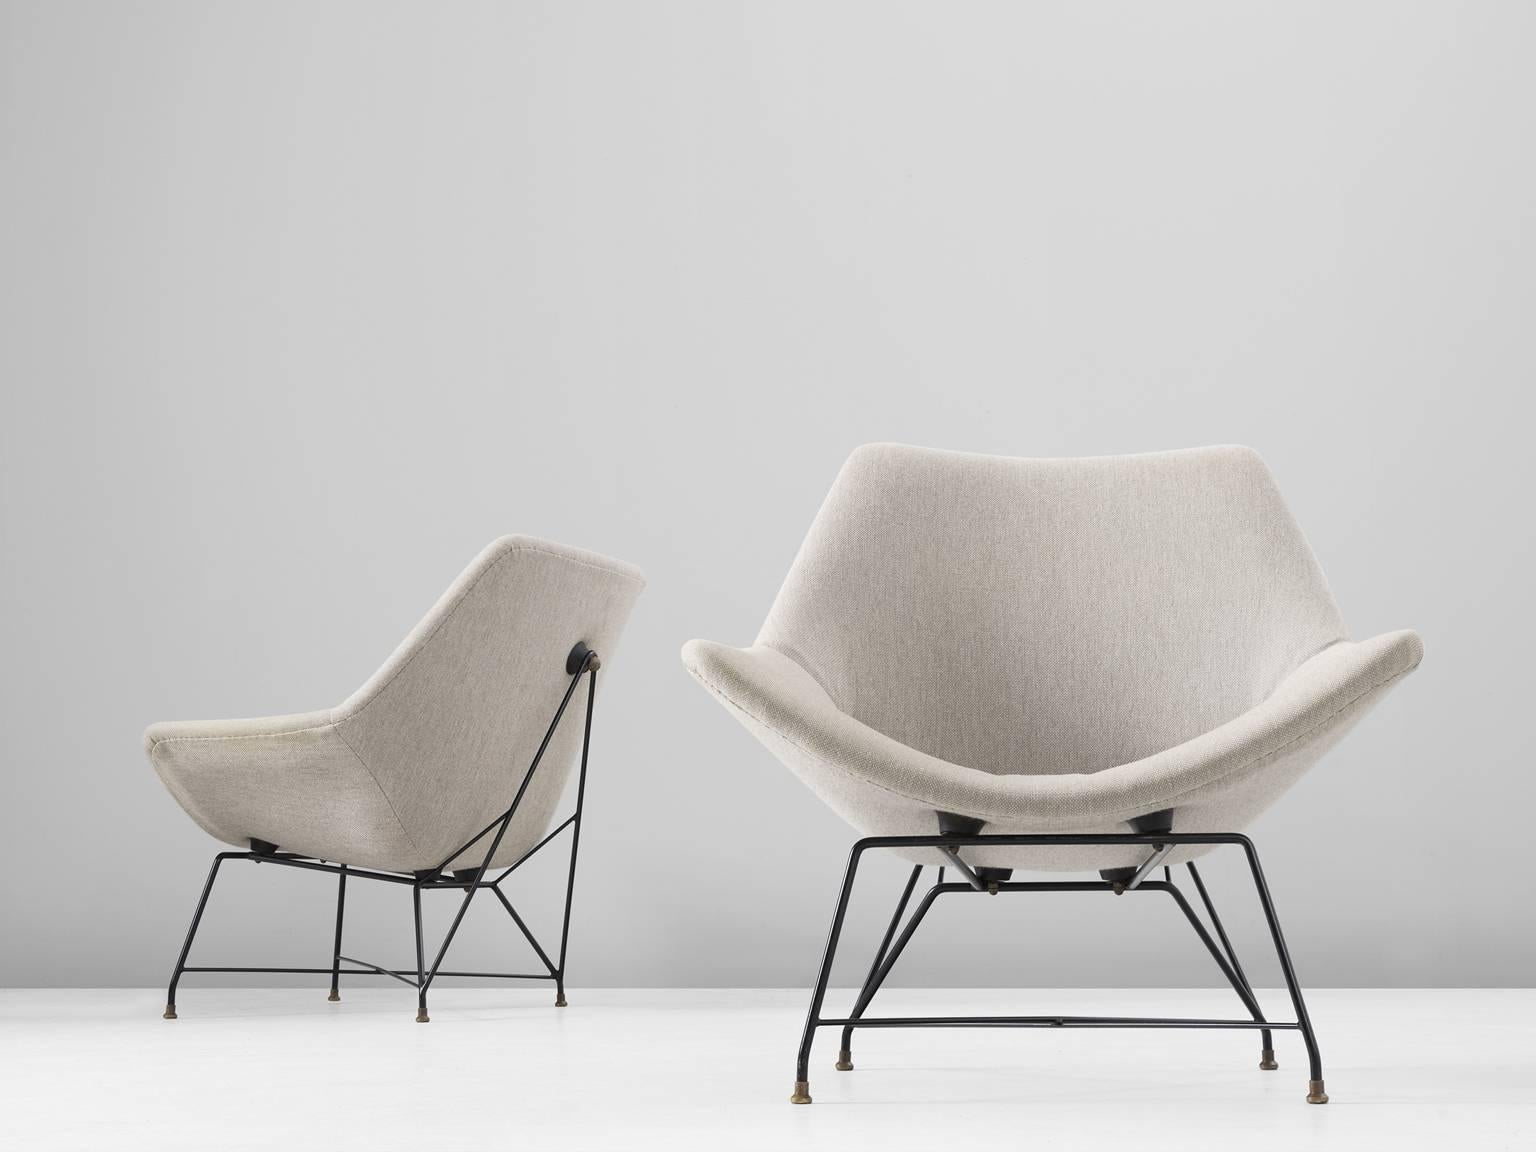 Pair of lounge chairs, in metal and fabric, by Augusto Bozzi for Saporiti, Italy, 1950s.

Sculptural lounge chairs for Sapporiti. By it's hairpin frame and shape of the shell this chair in line with the designs of Augusto Bozzi for this Italian